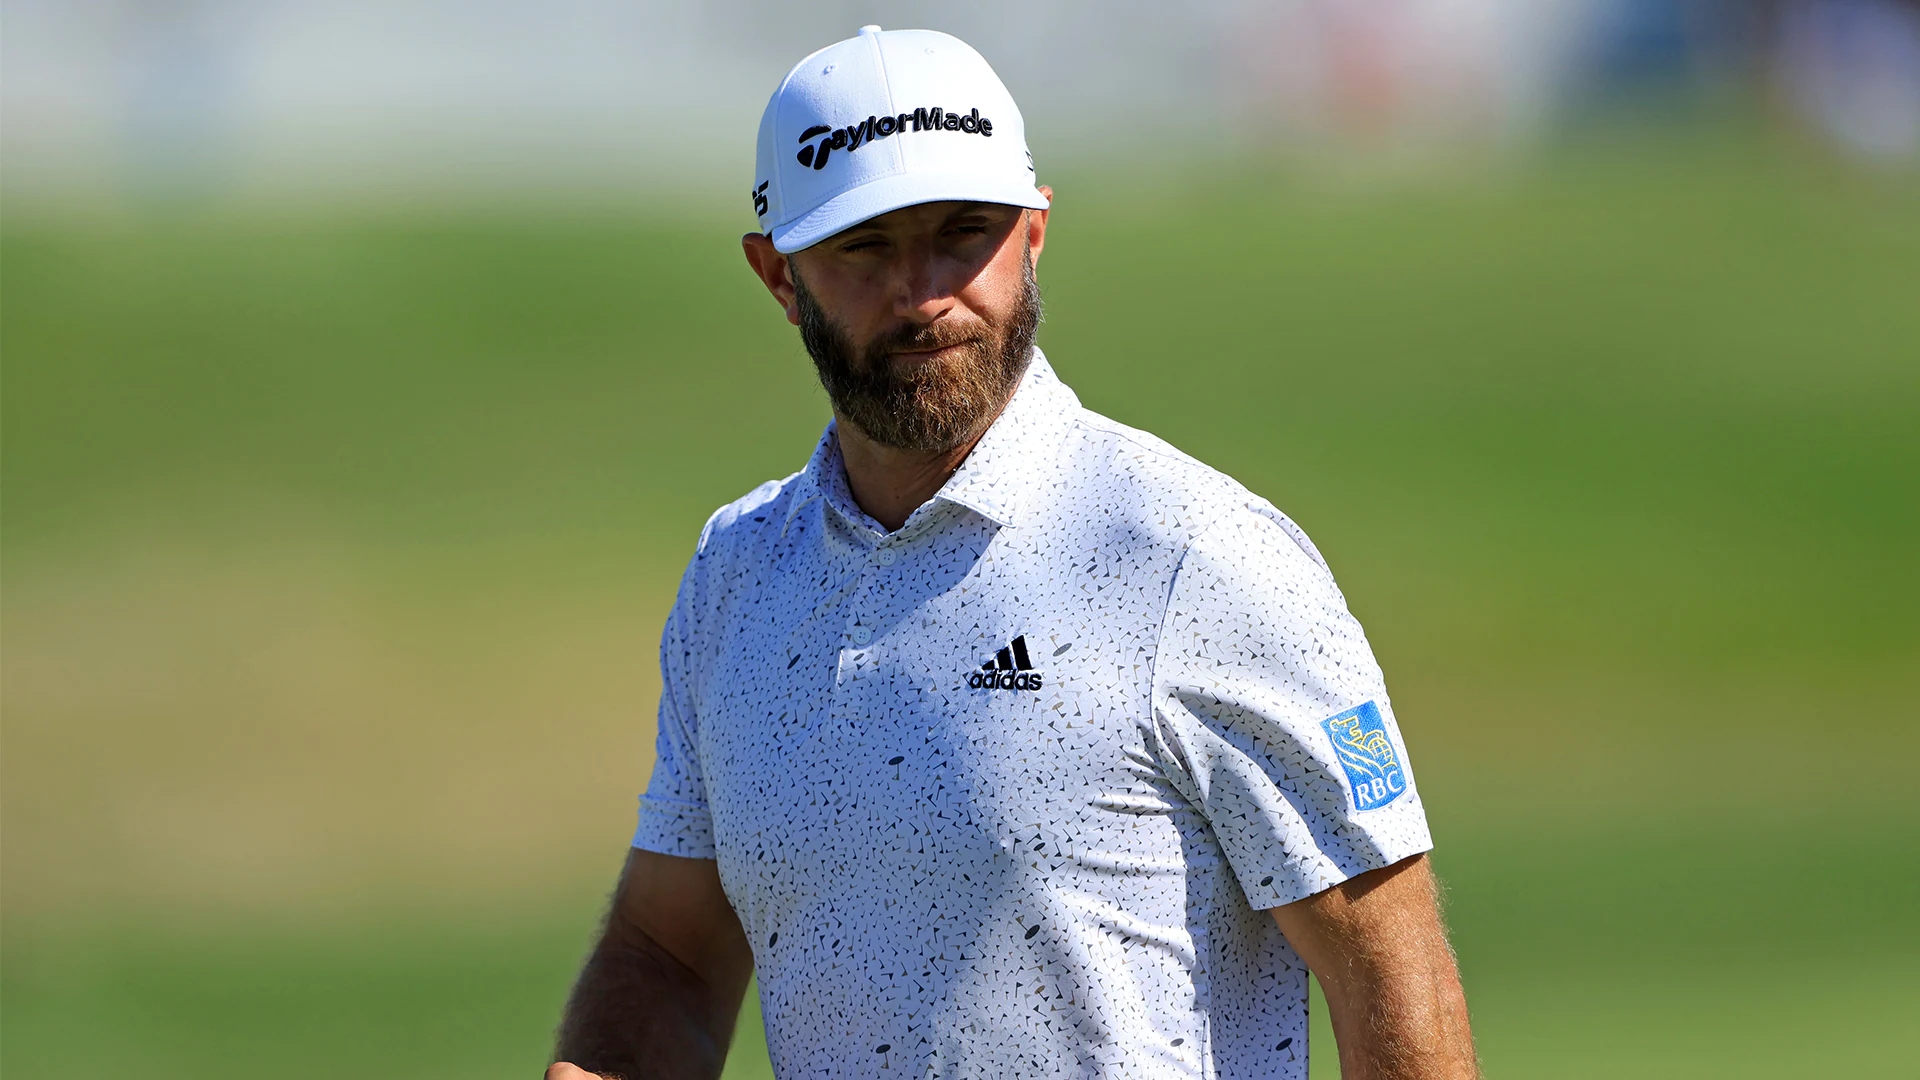 Dustin Johnson cards 67, hopes game will ‘kick in to good form’ as majors loom